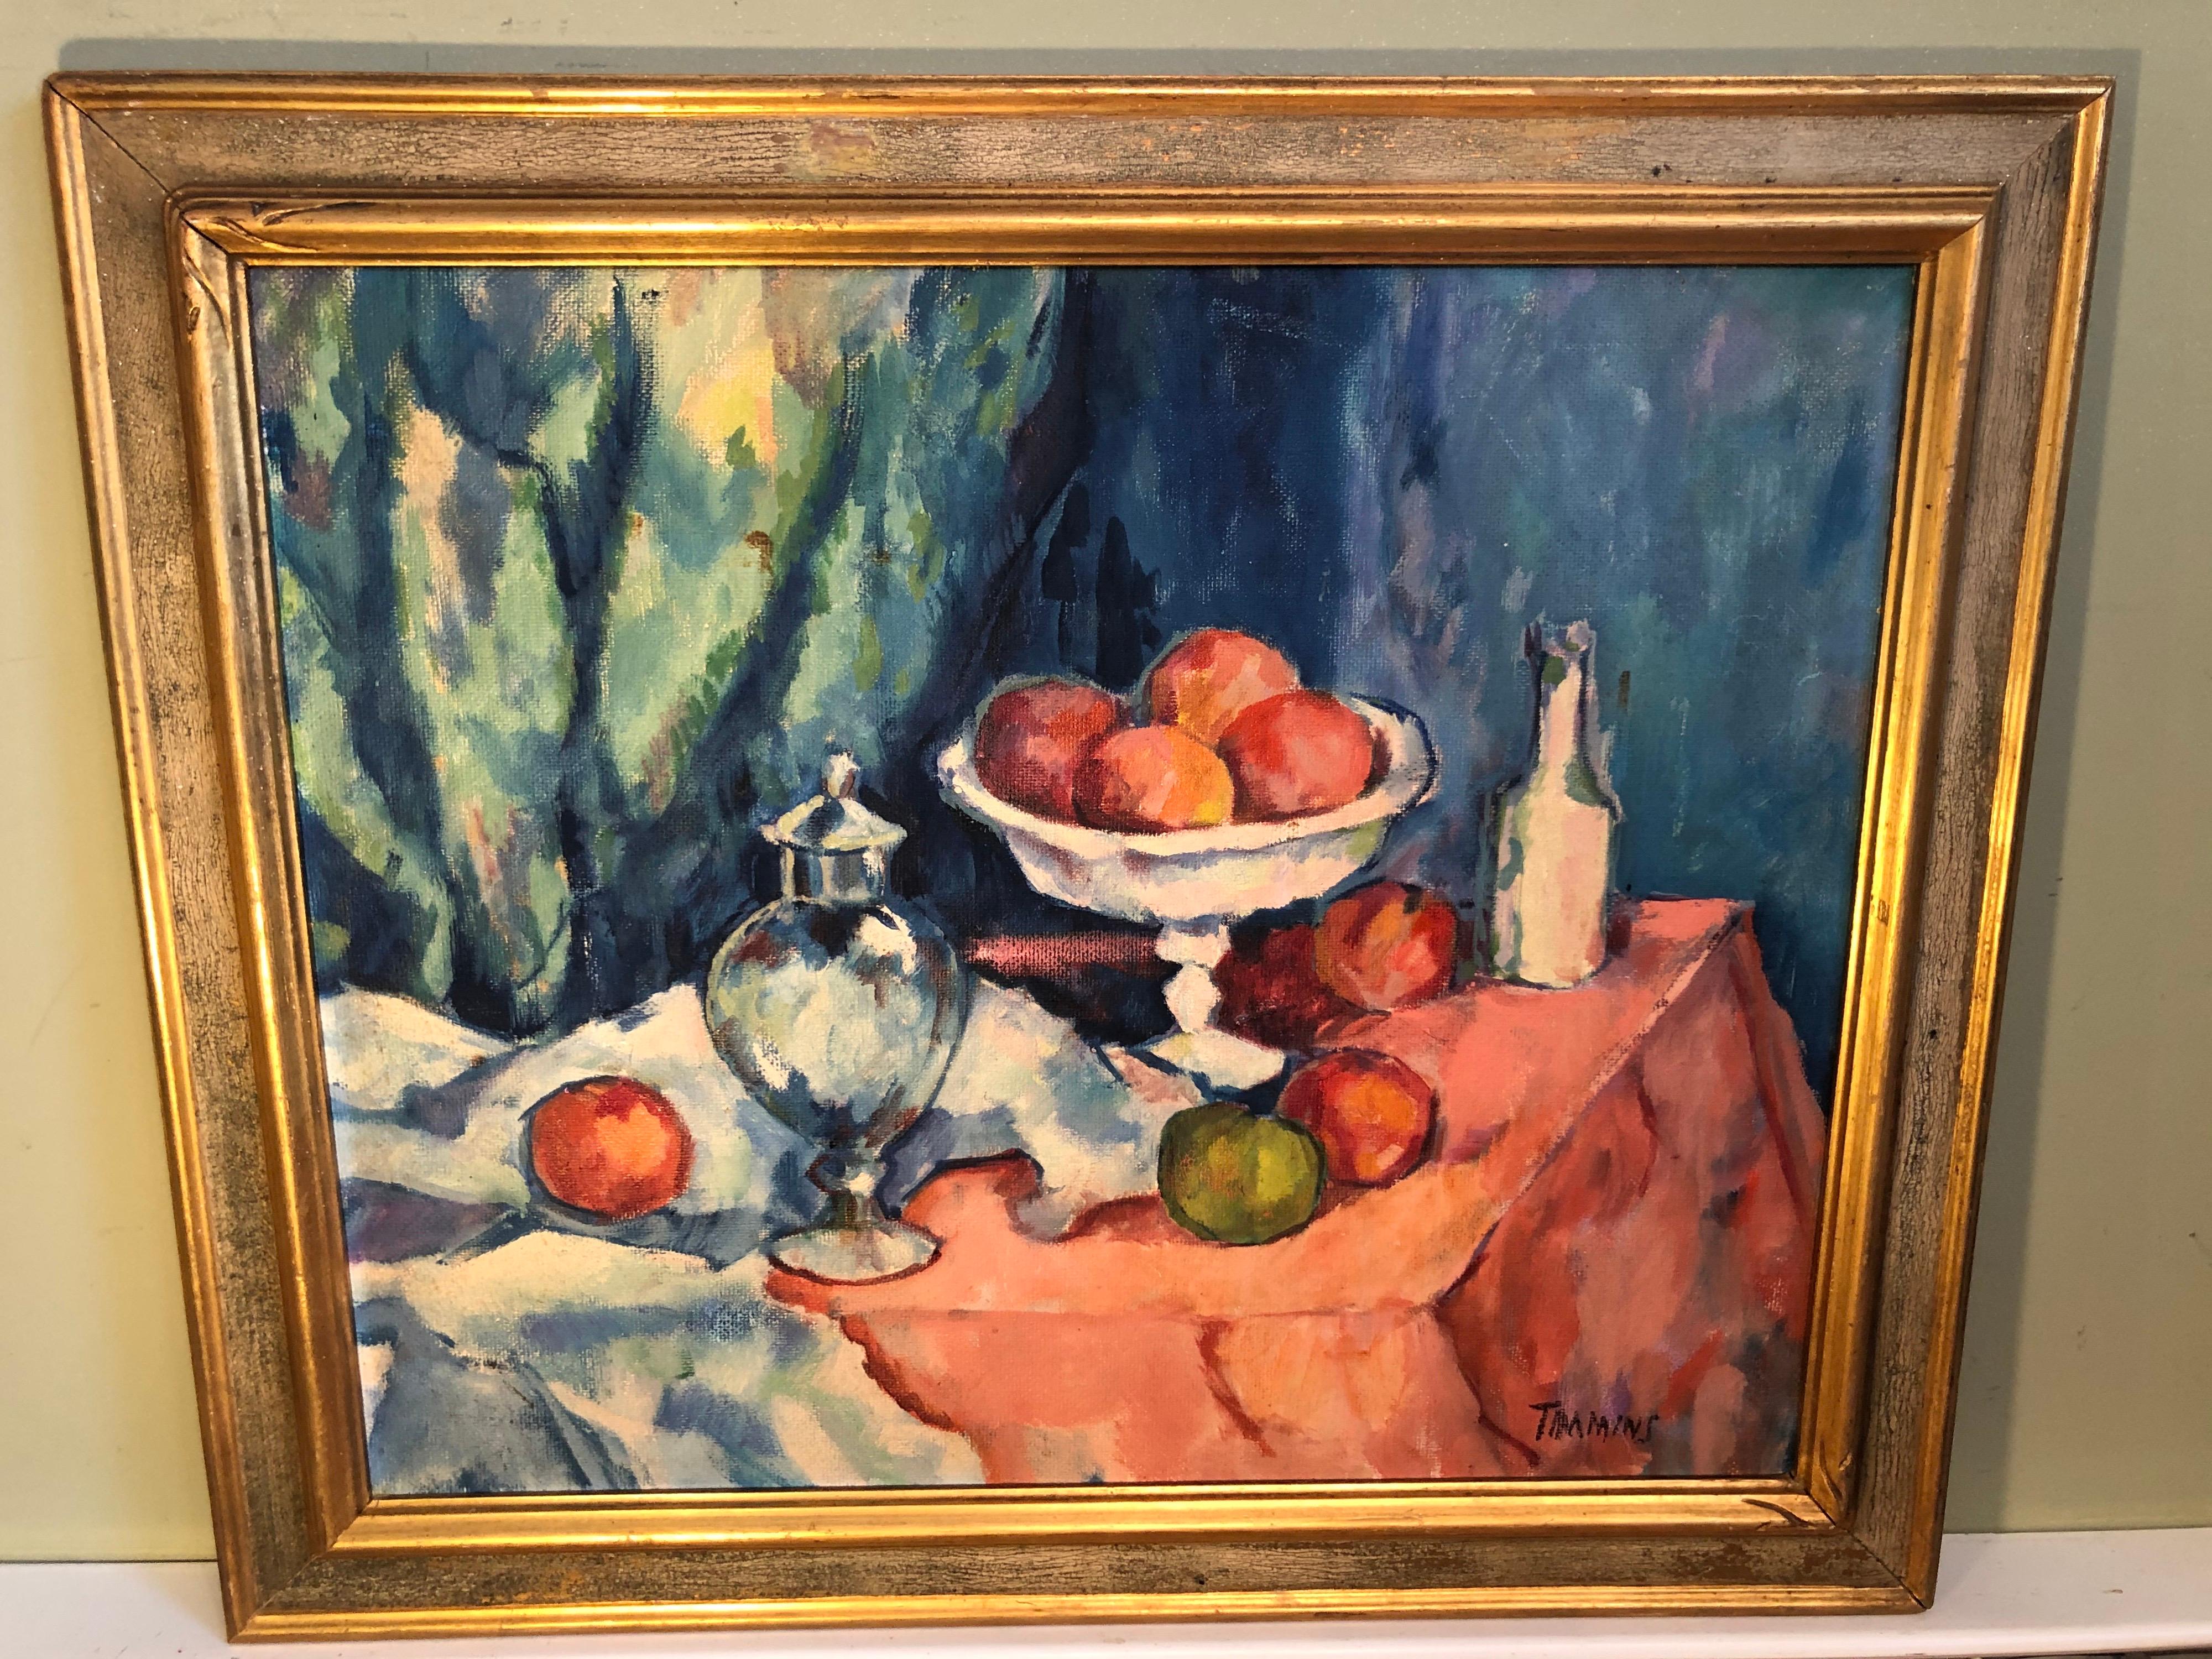 Fruit still life on board signed Timmons. Attributed to William Federick Timmons(1915-1985) . Rich colors of blue, red and pink make up this fruit still life composition.
The composition consists of fruit in a pedestal bowl and the detailed drapes